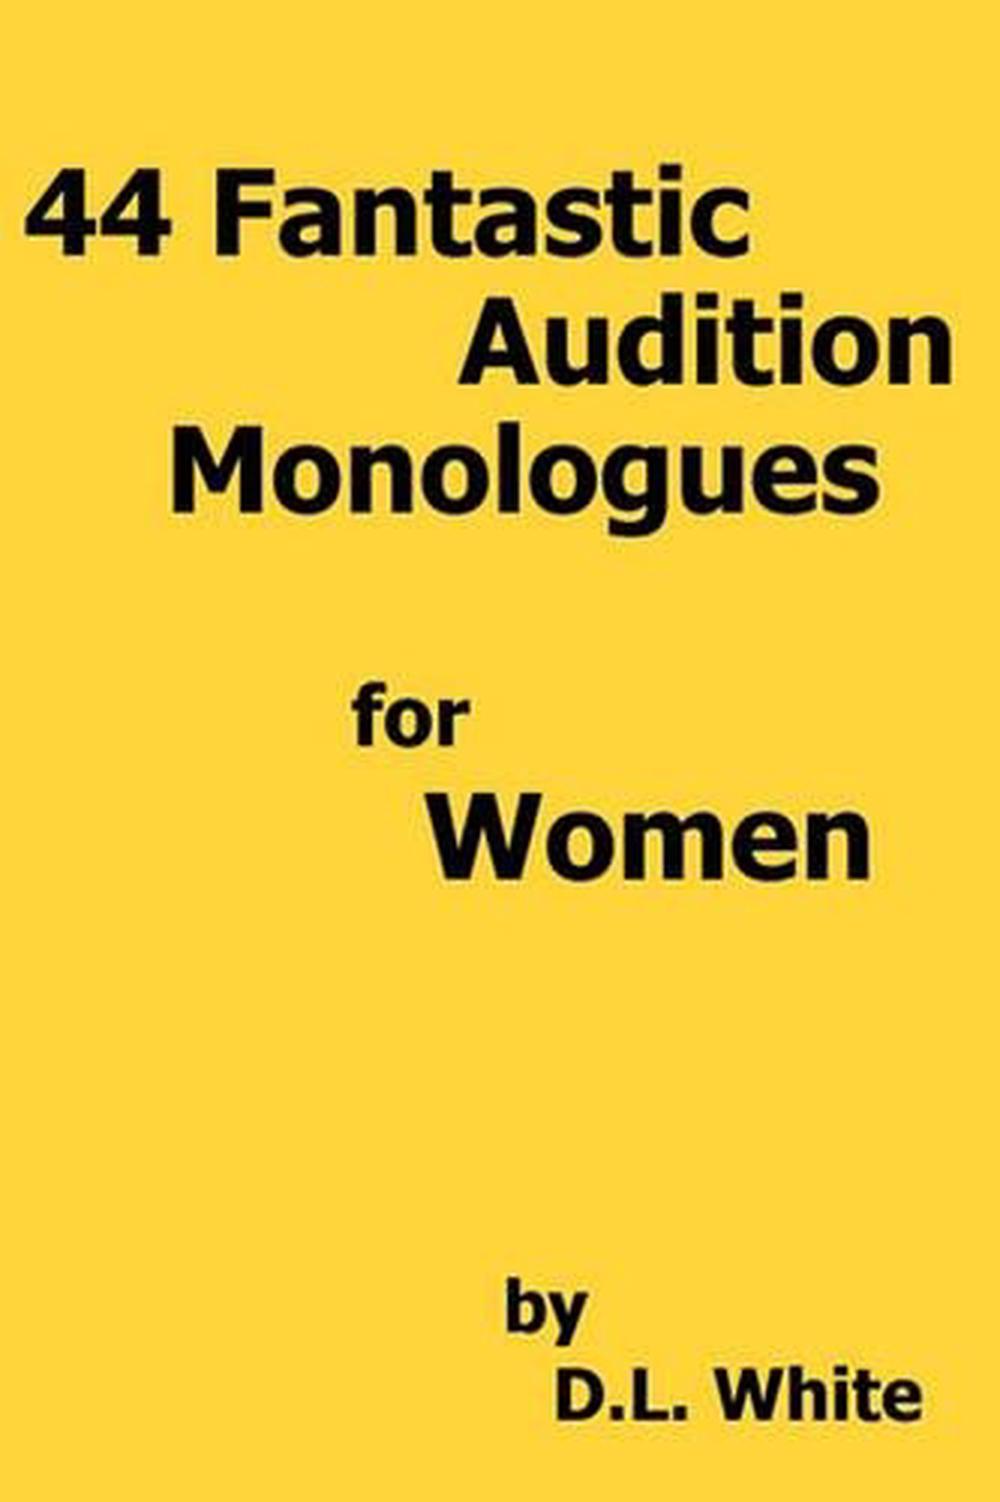 family friendly comedic monologues for women